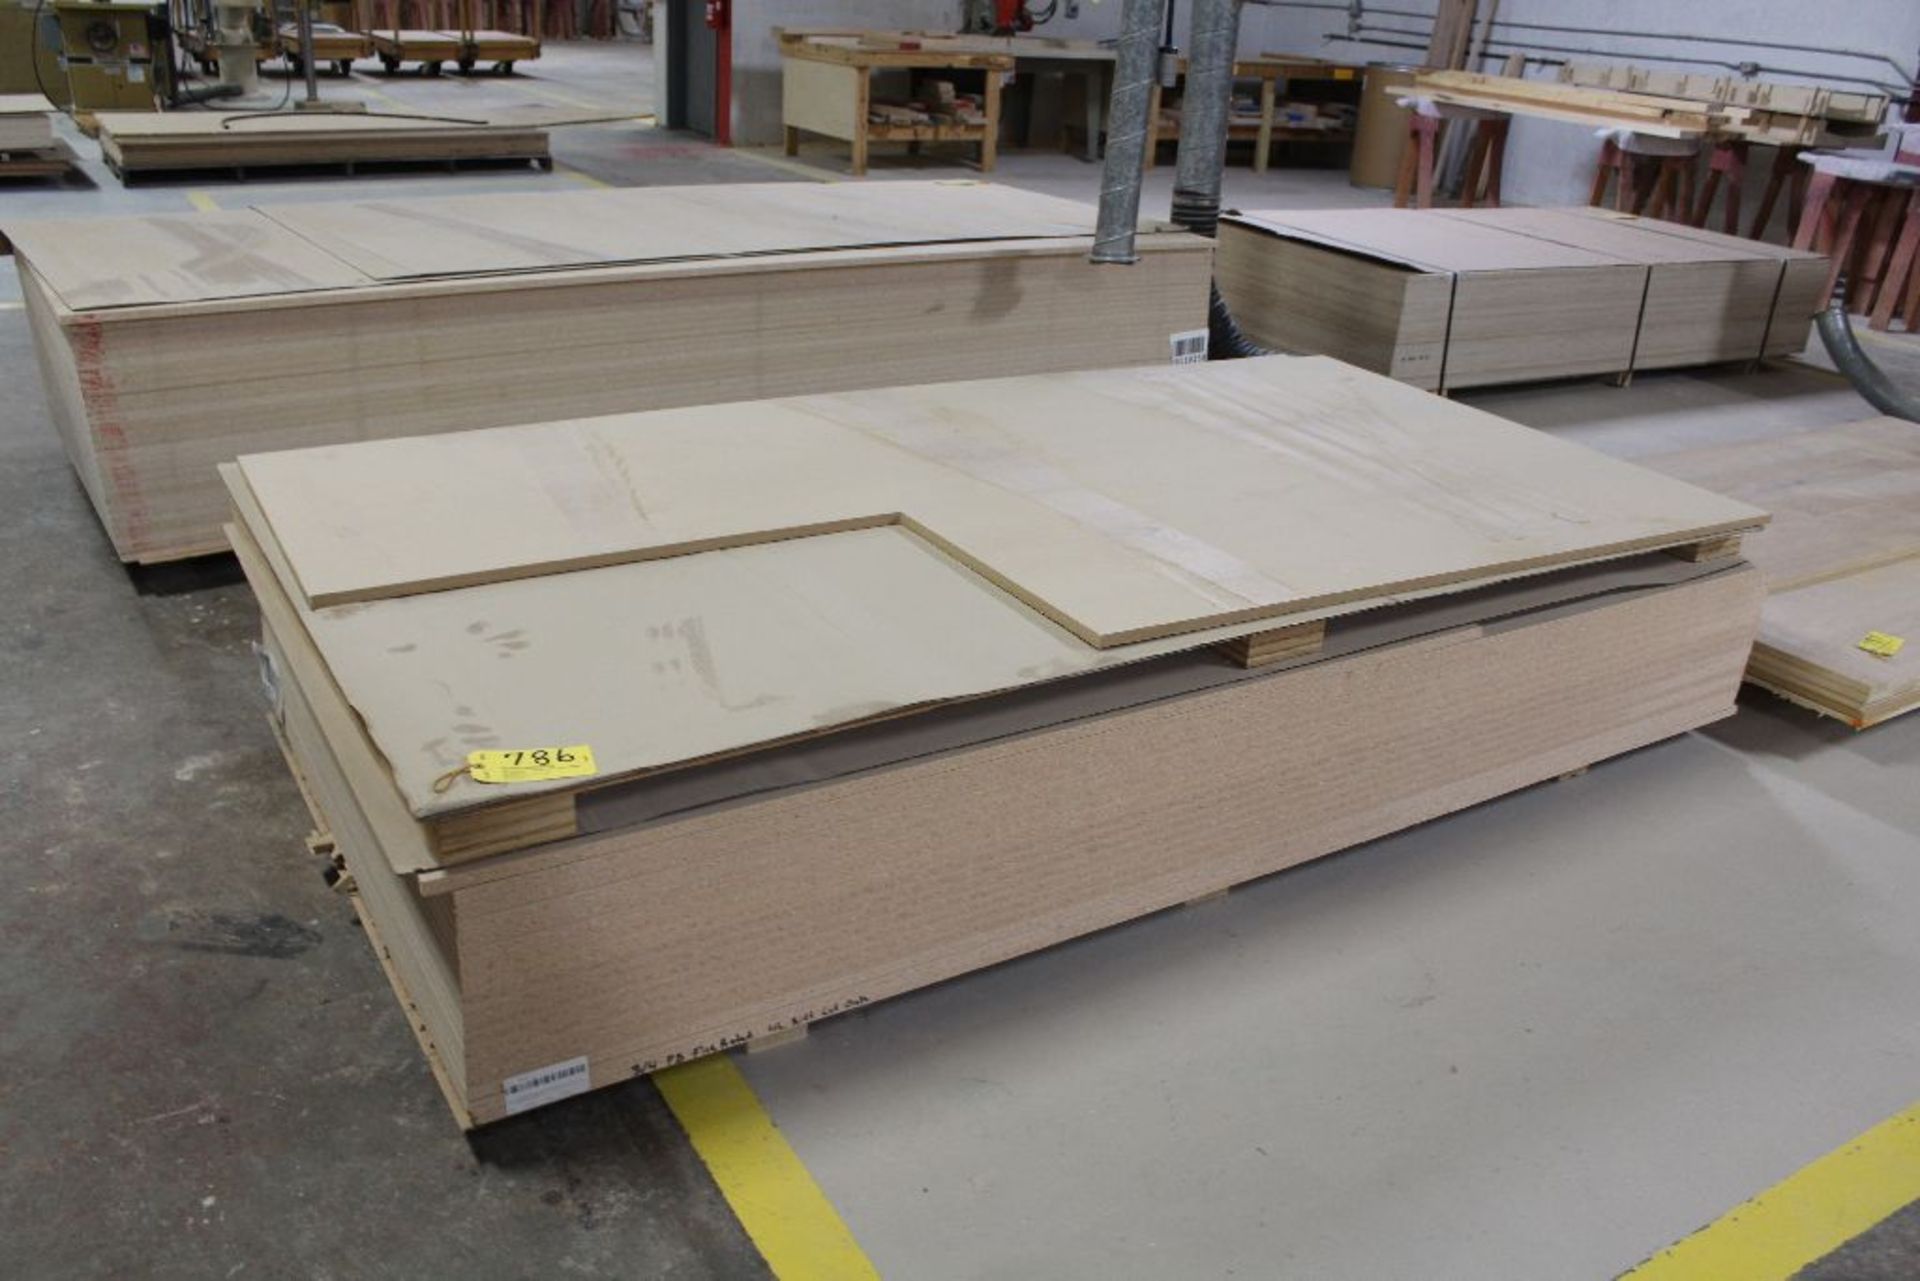 Lumber, (18) plywood particle board fire retardent, 3/4" x 49" x 97".